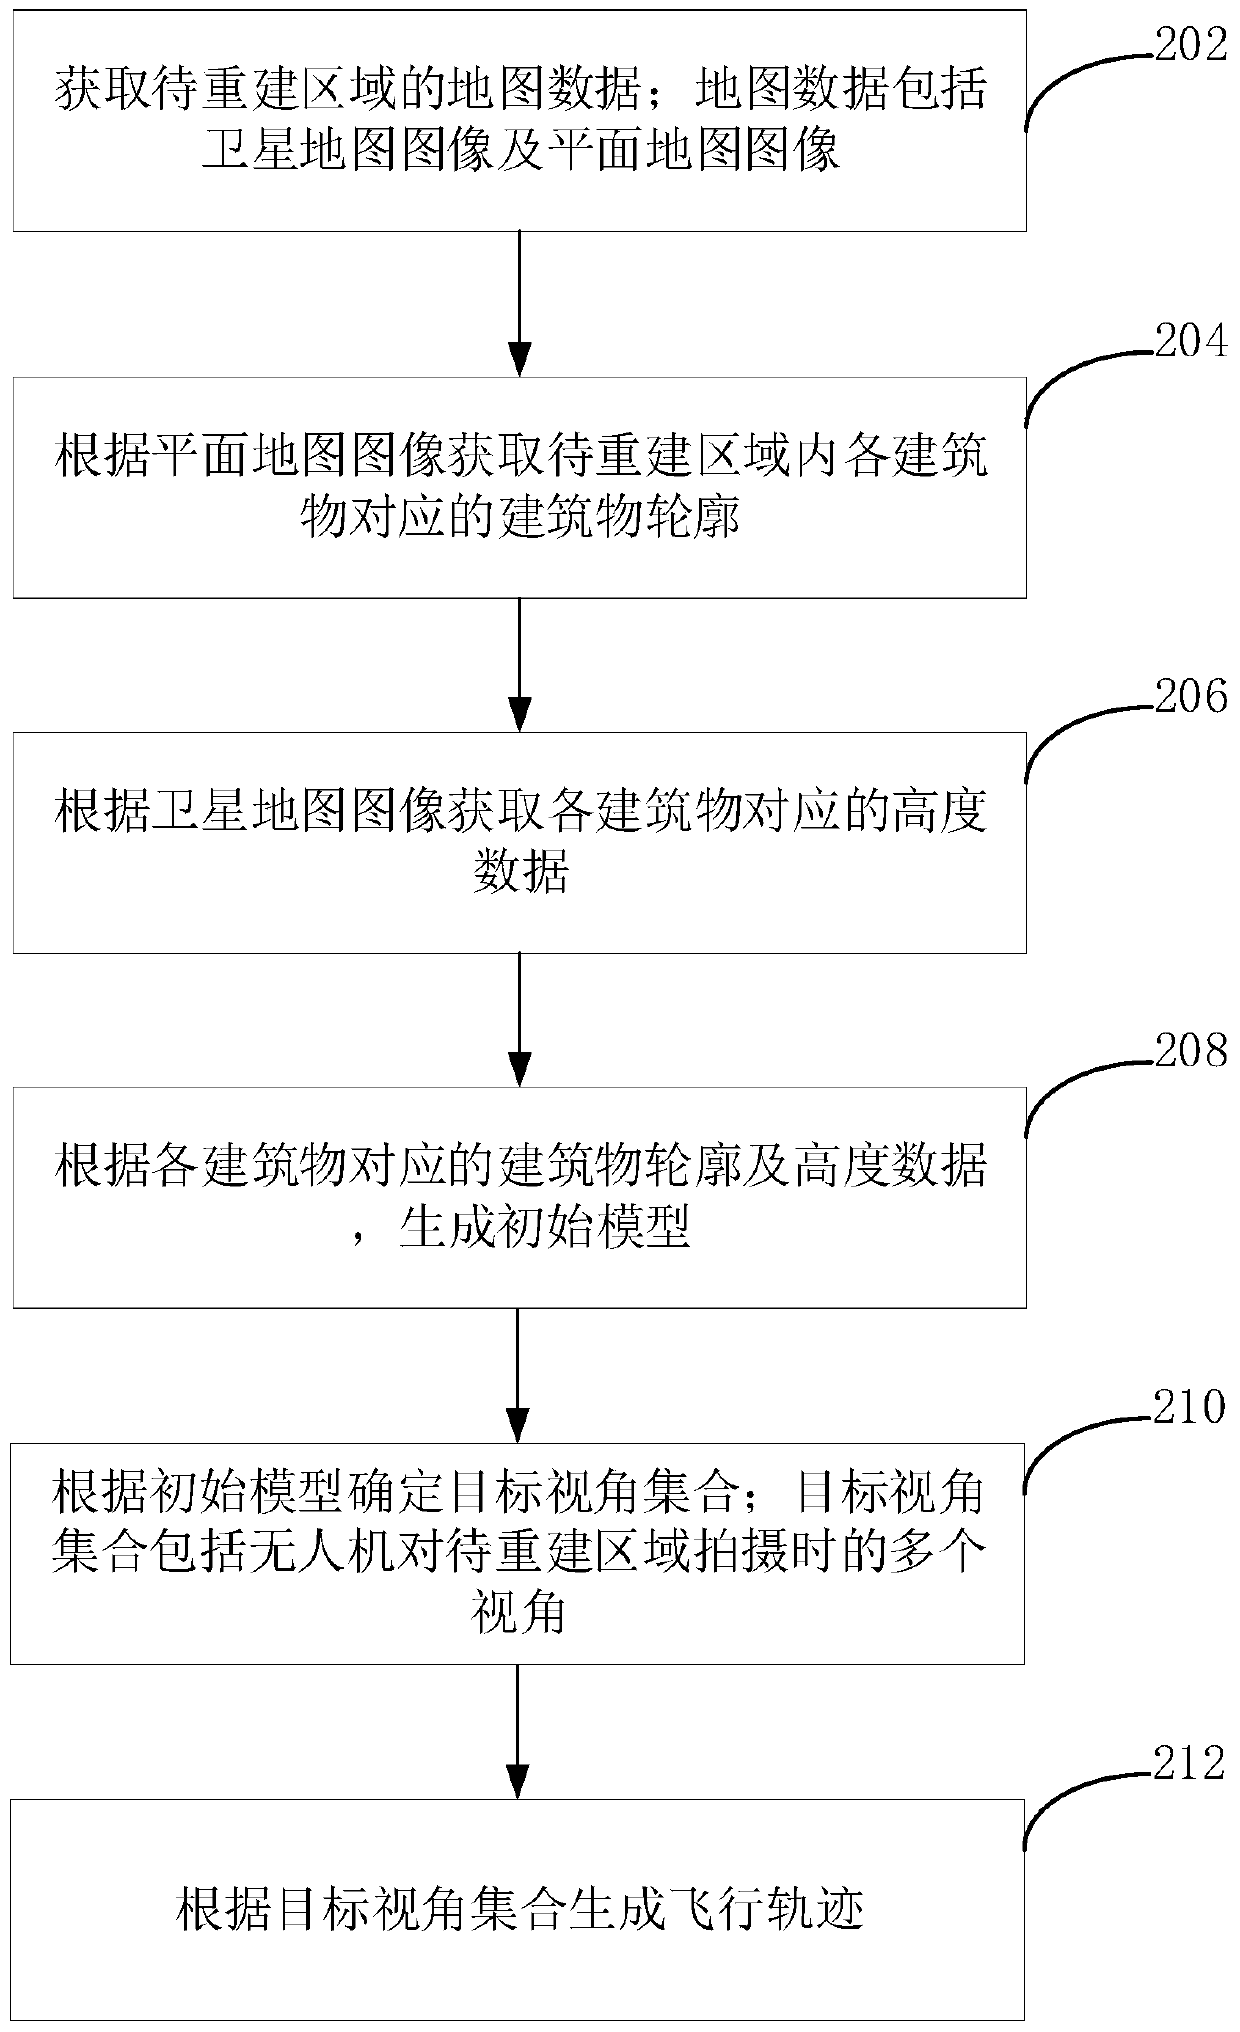 Unmanned aerial vehicle flight path generation method and device, computer device and storage medium